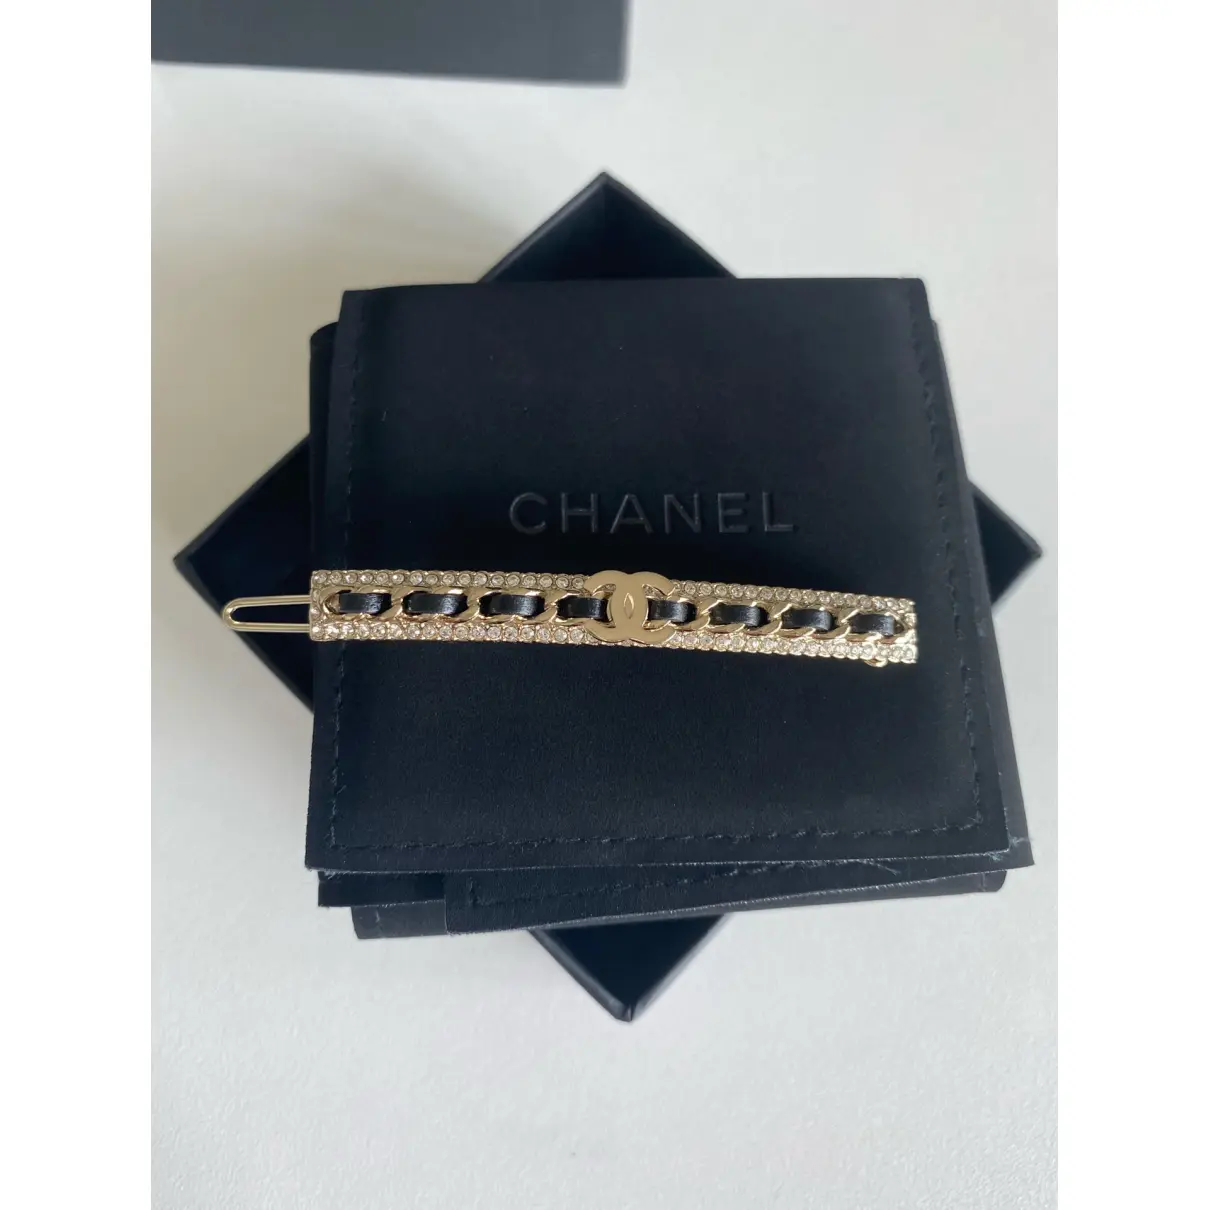 Buy Chanel Hair accessory online